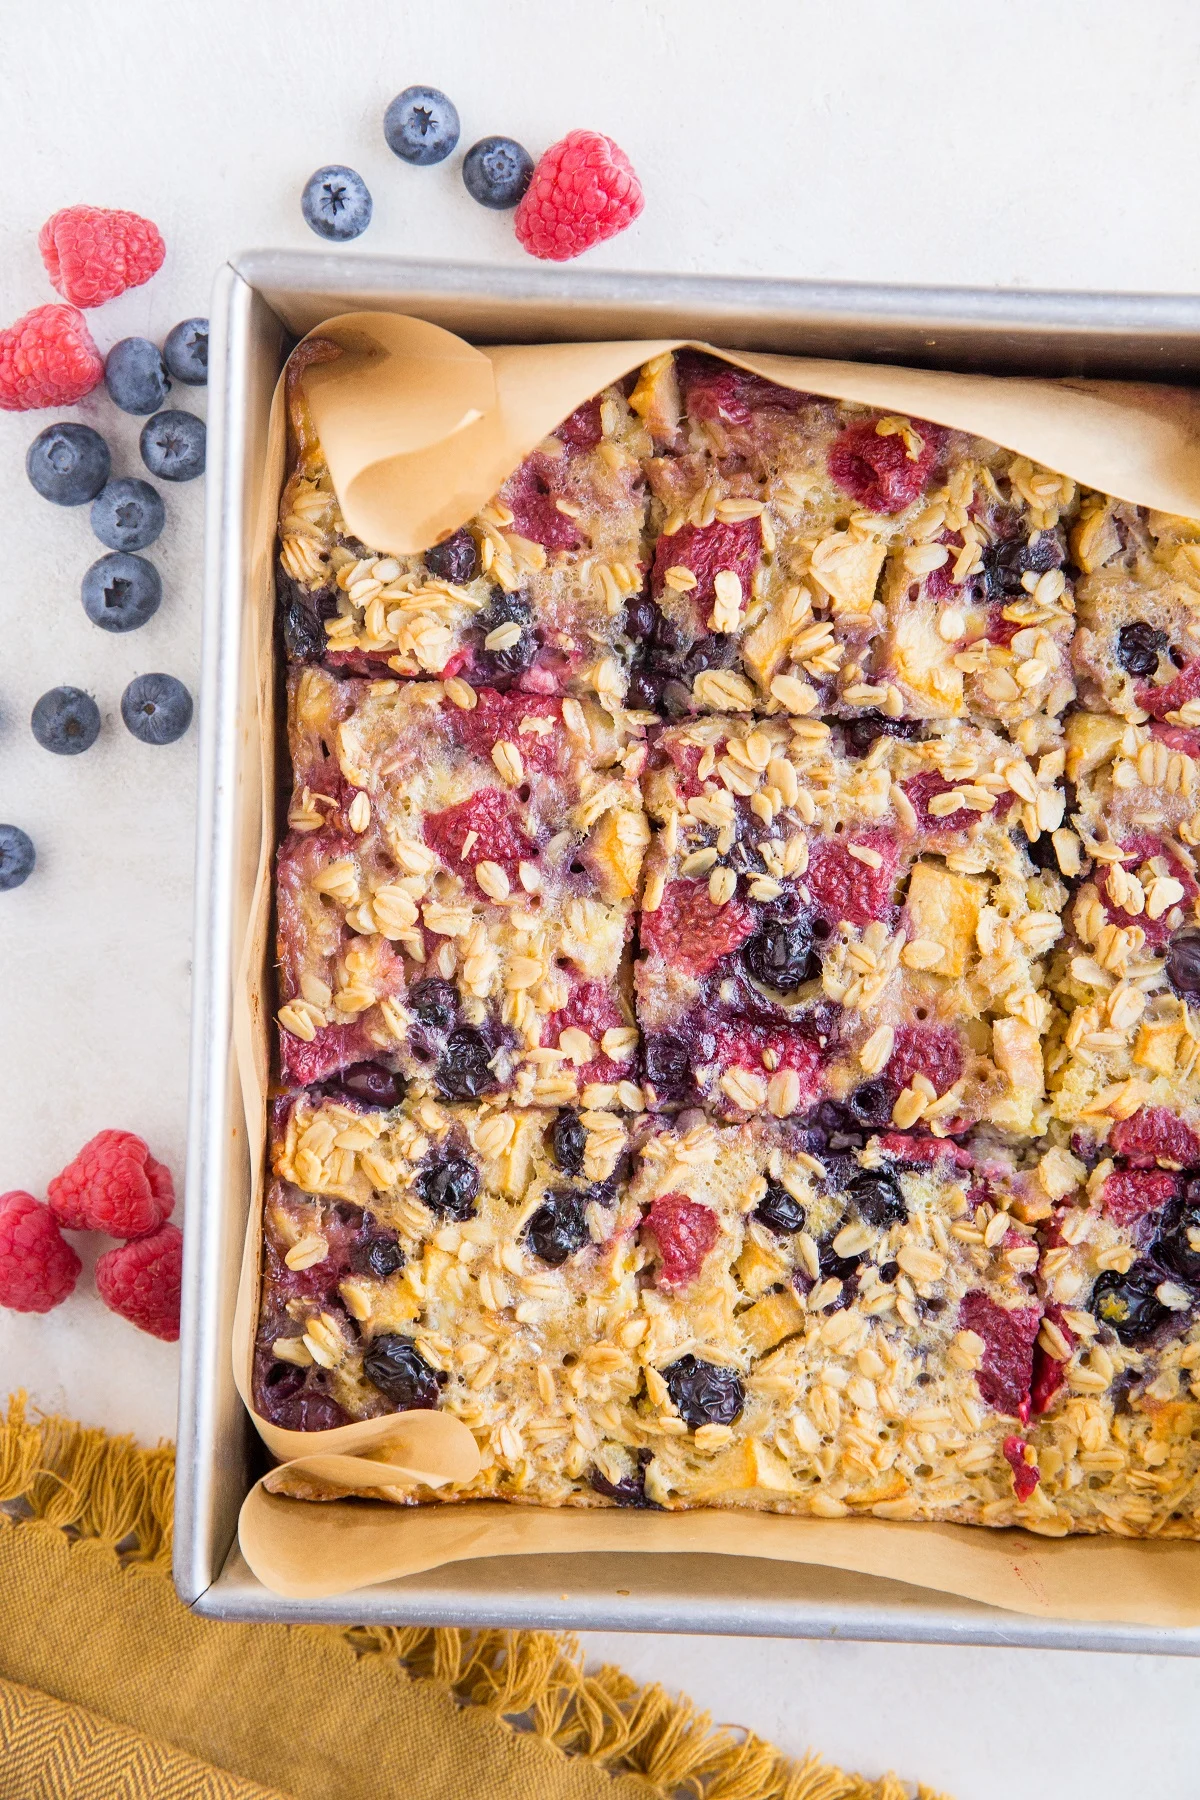 baking pan with finished baked oatmeal sliced into bars with berries all around